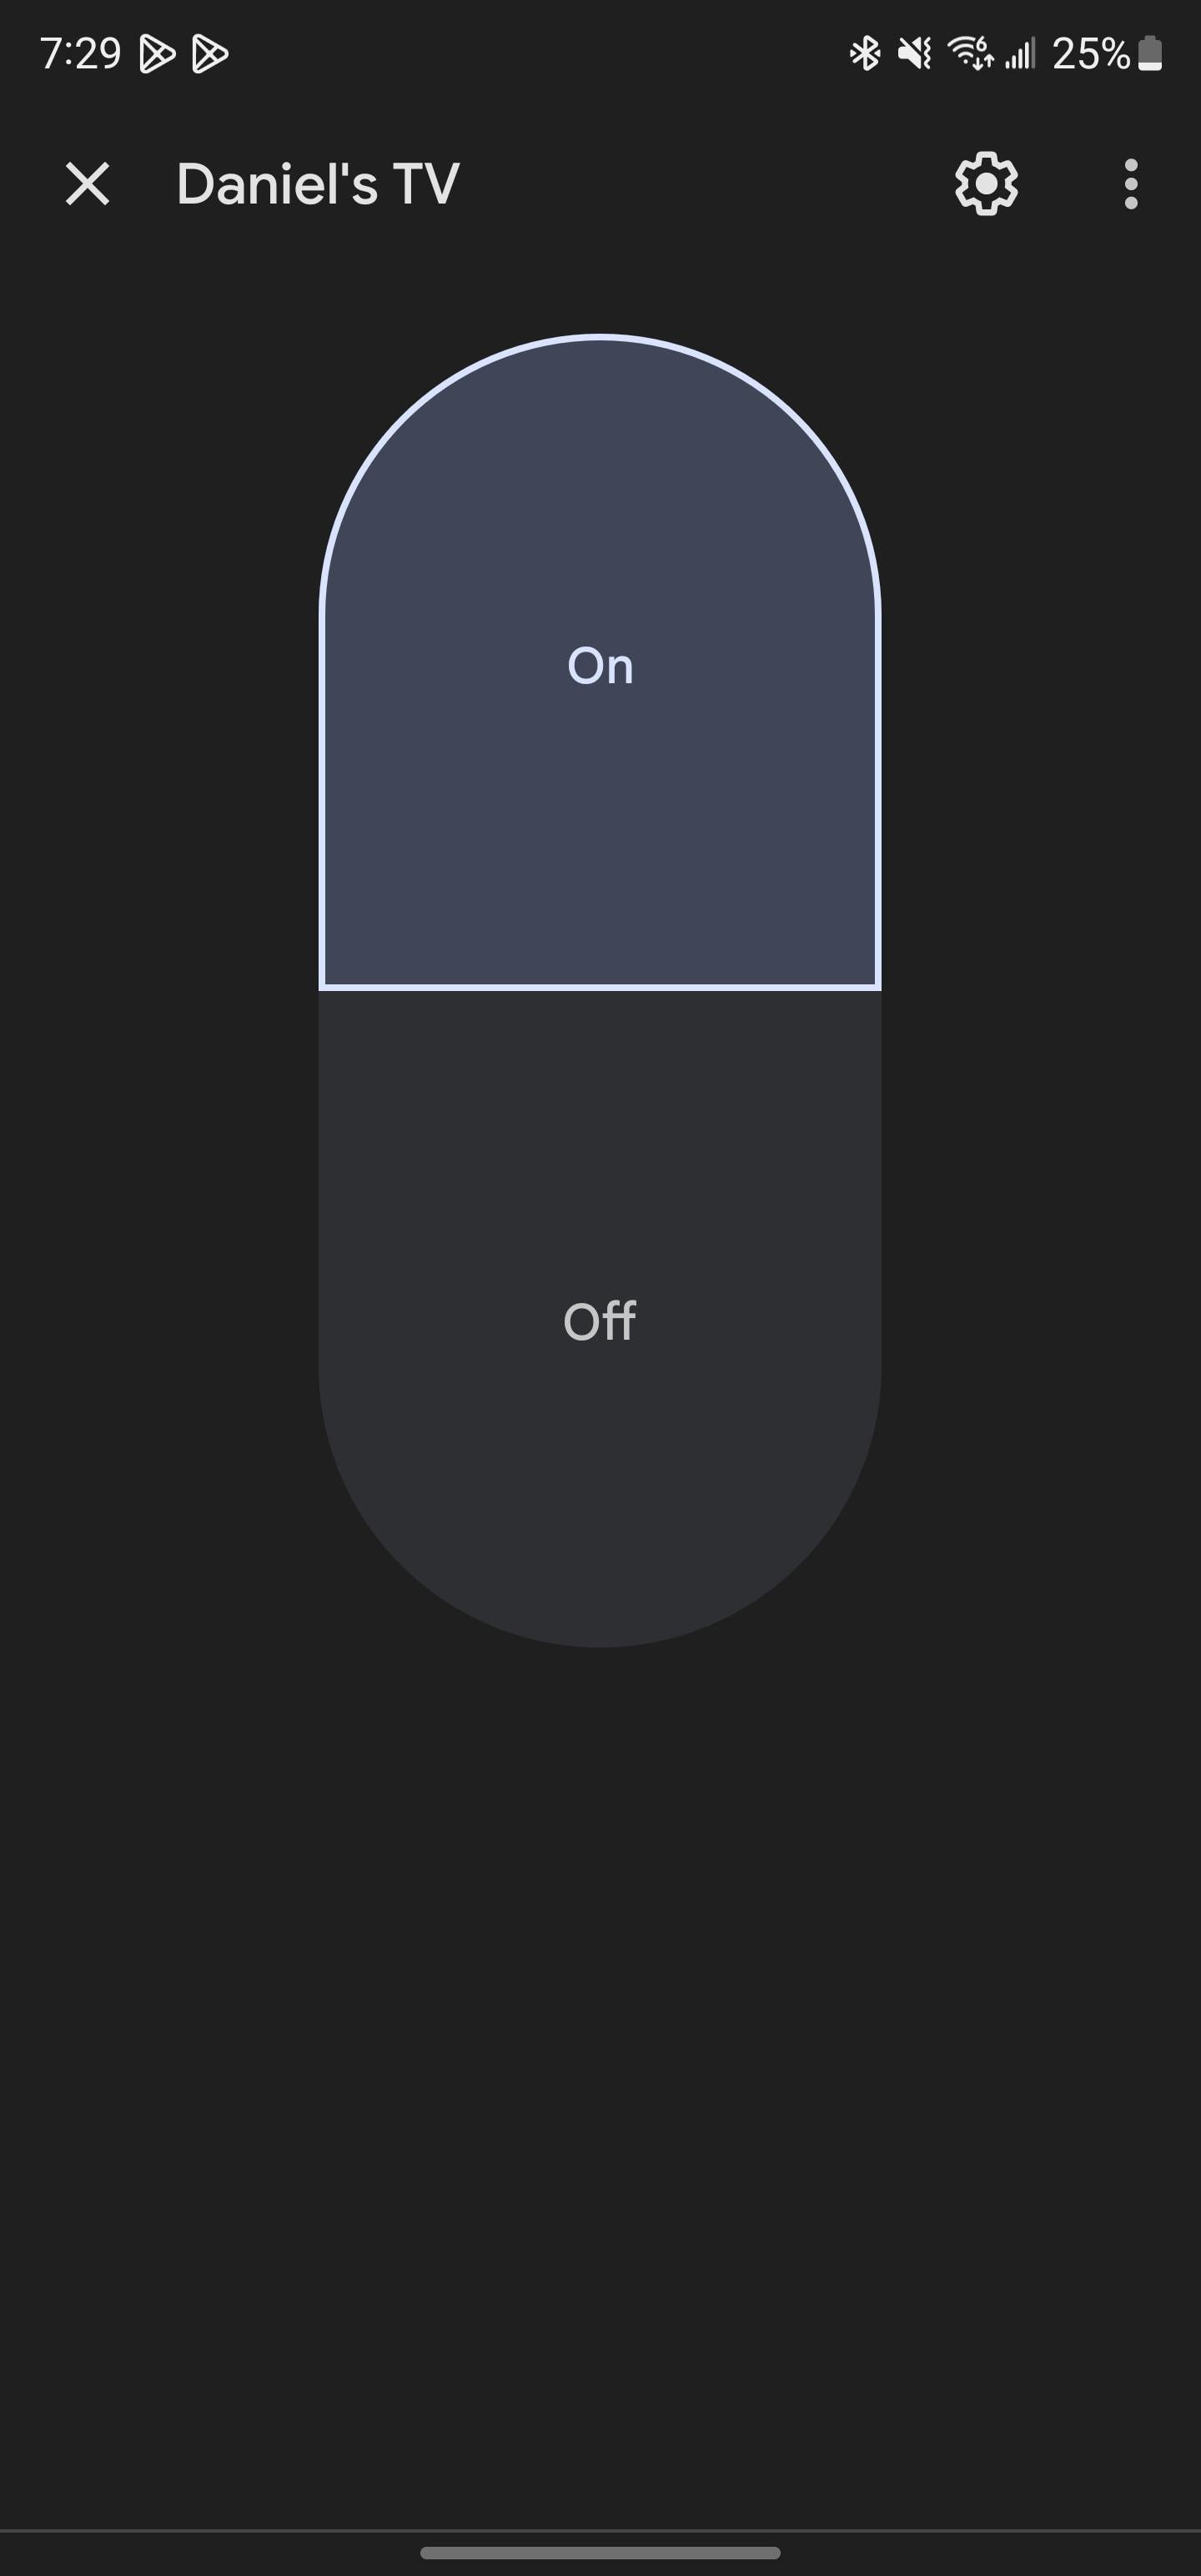 Google Home app rolls out full TV controls on supported sets [U]